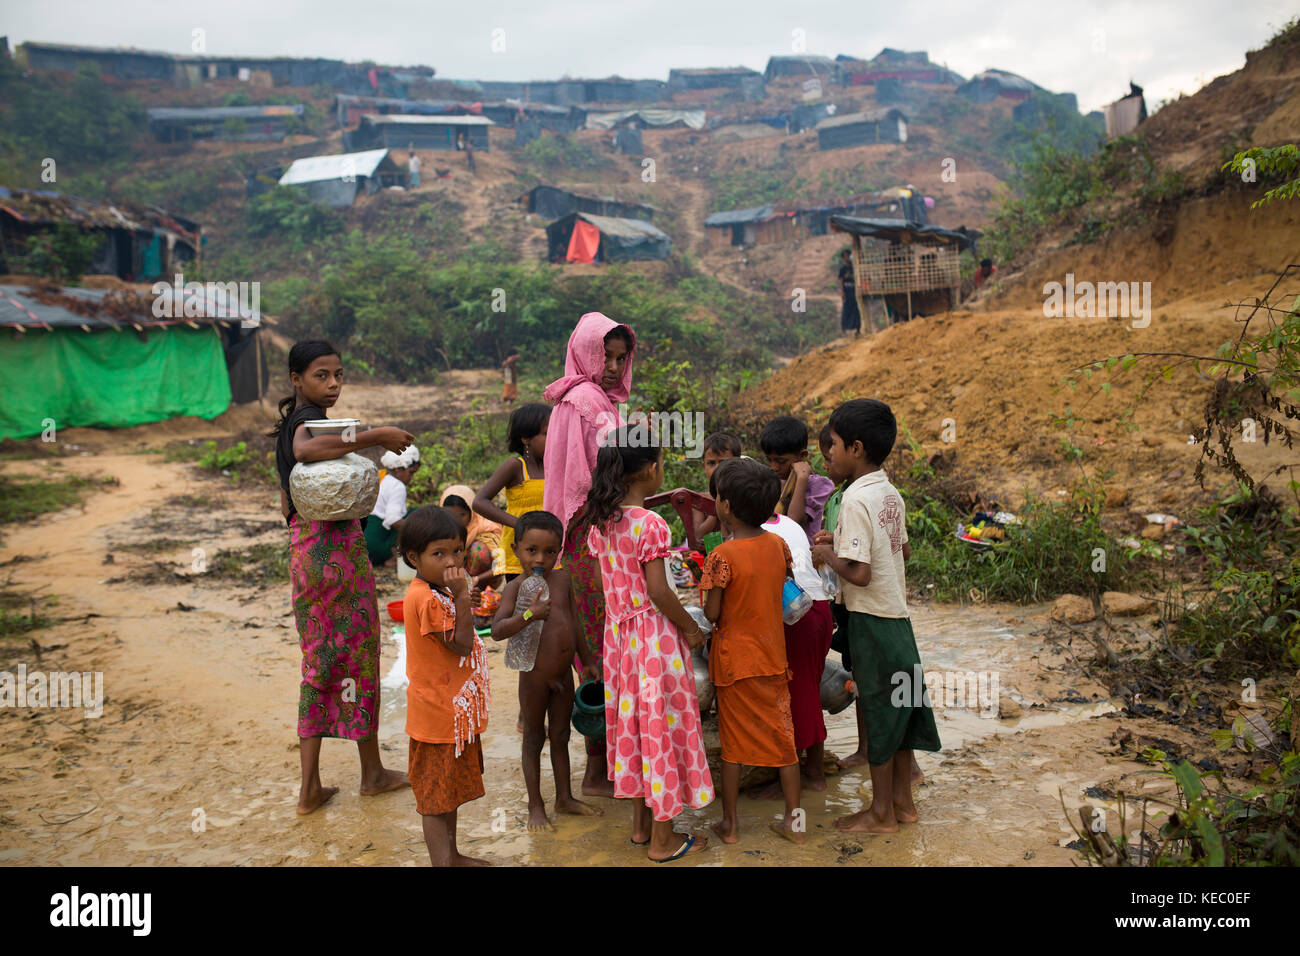 Cox's Bazar, Bangladesh. 19th Oct, 2017. Rohingya refugee's lifestyle inside Balukhali refugee camp in Cox's Bazar, Bangladesh on October 19, 2017.  Almost 600,000 Rohingya refugees have reached Bangladesh since August, fleeing violence in Myanmar's Rakhine state, where the UN has accused troops of waging an ethnic cleansing campaign against them. Credit: zakir hossain chowdhury zakir/Alamy Live News Stock Photo